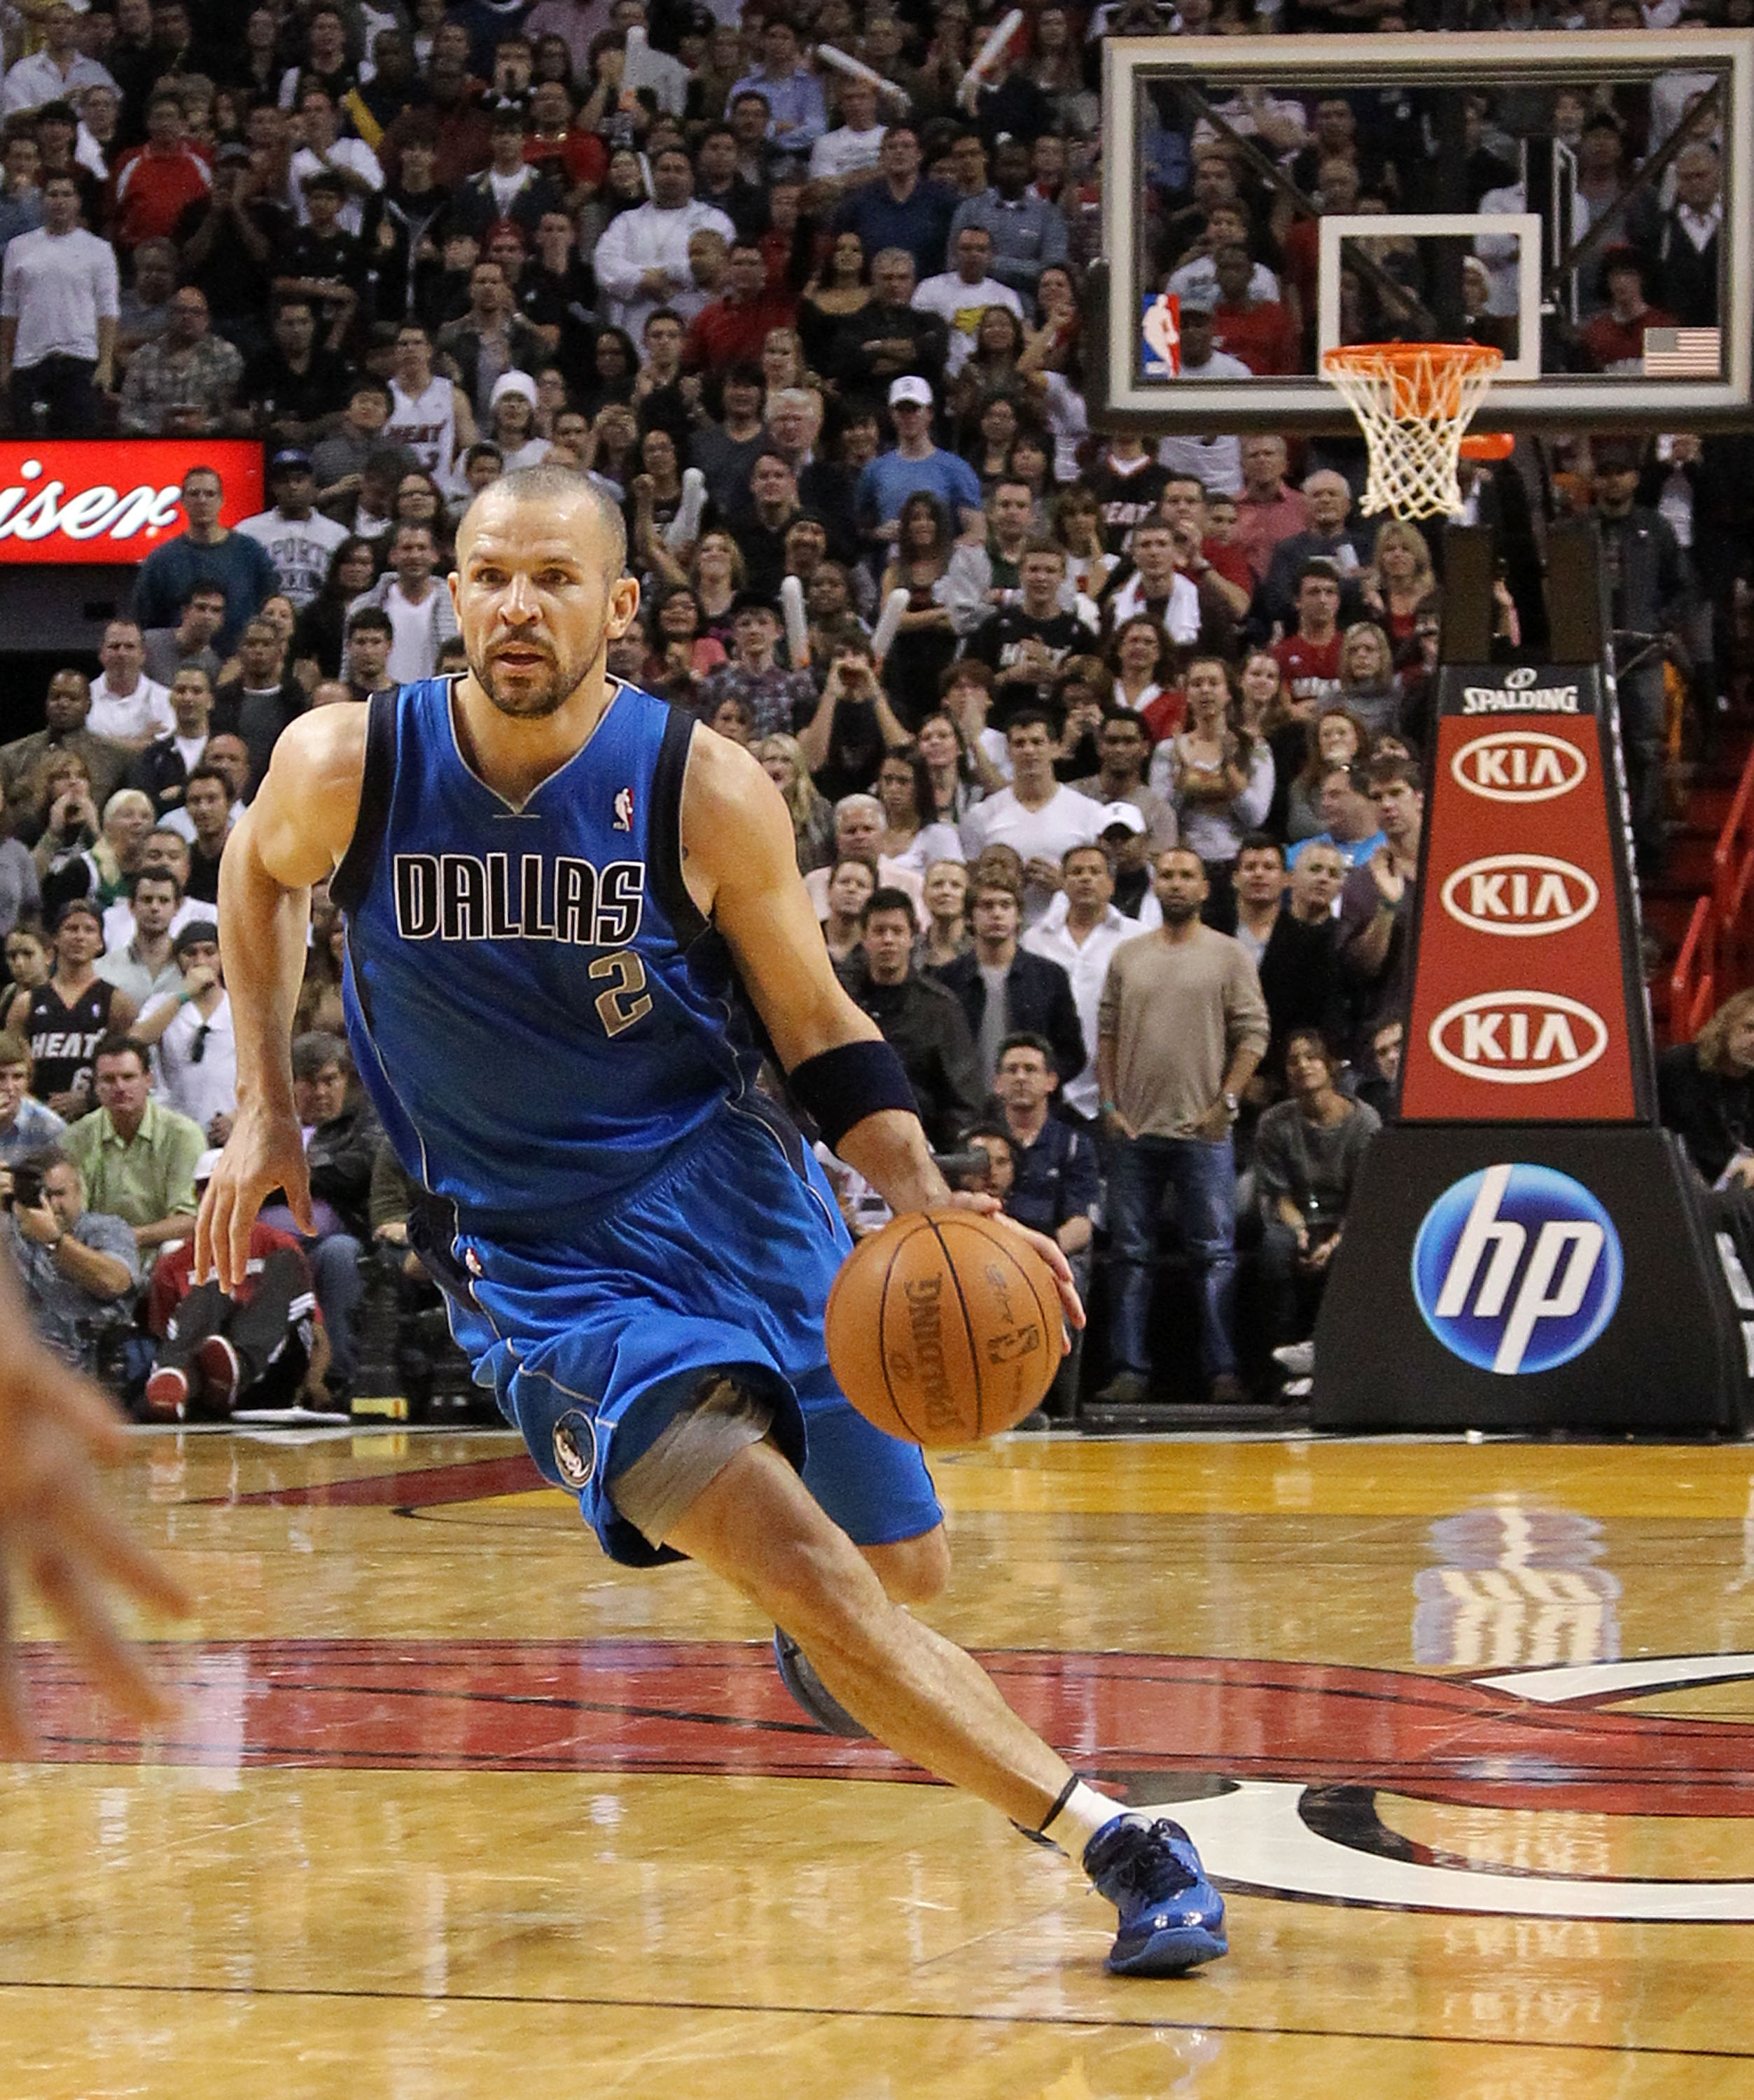 MIAMI, FL - DECEMBER 20:  Jason Kidd #2 of the Dallas Mavericks dribbles the ball during a game against the Miami Heat at American Airlines Arena on December 20, 2010 in Miami, Florida. NOTE TO USER: User expressly acknowledges and agrees that, by downloa